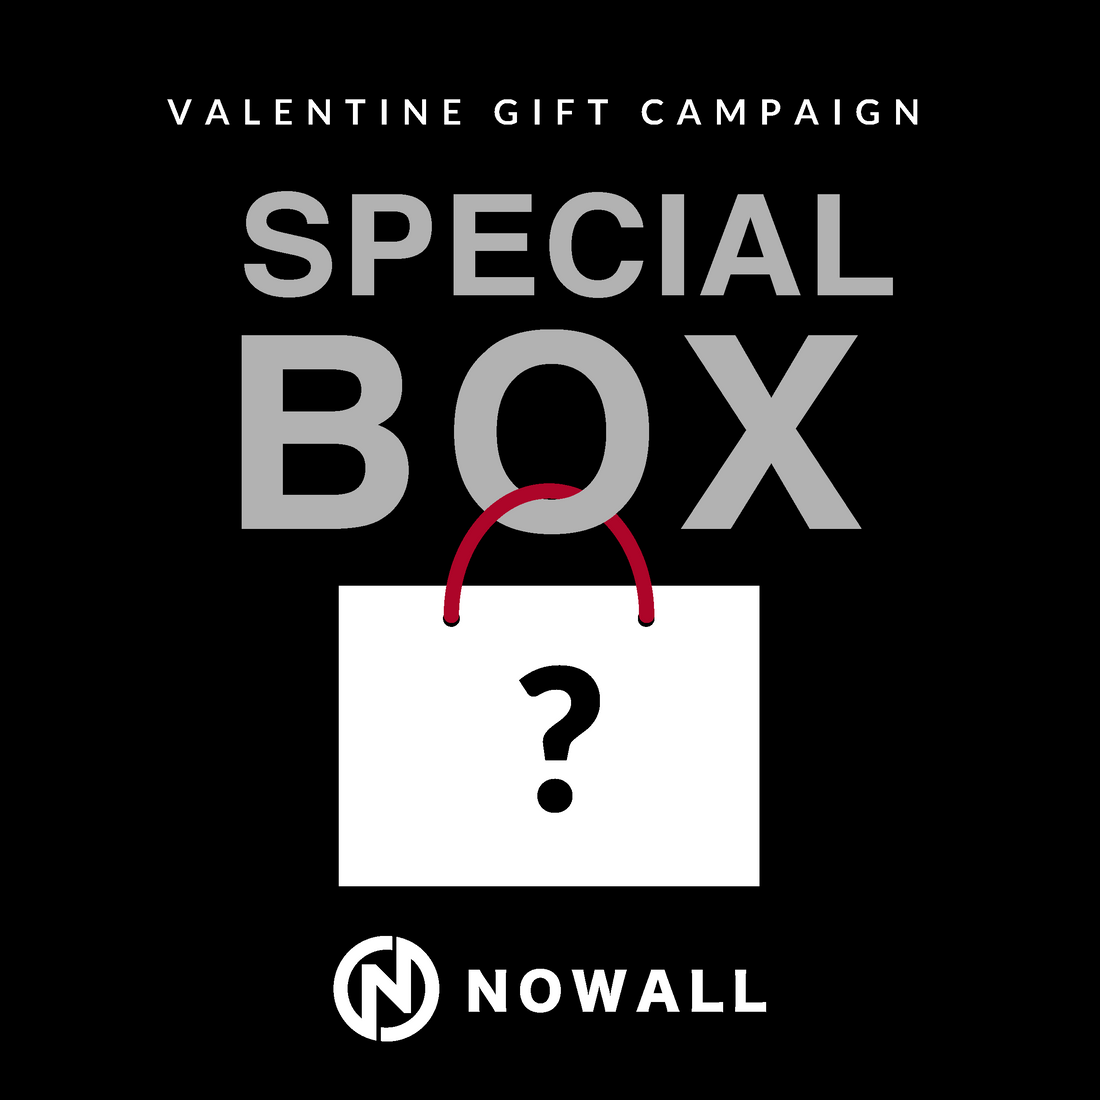 【NOWALL SPECIAL GIFT SET】VALENTINE GIFT